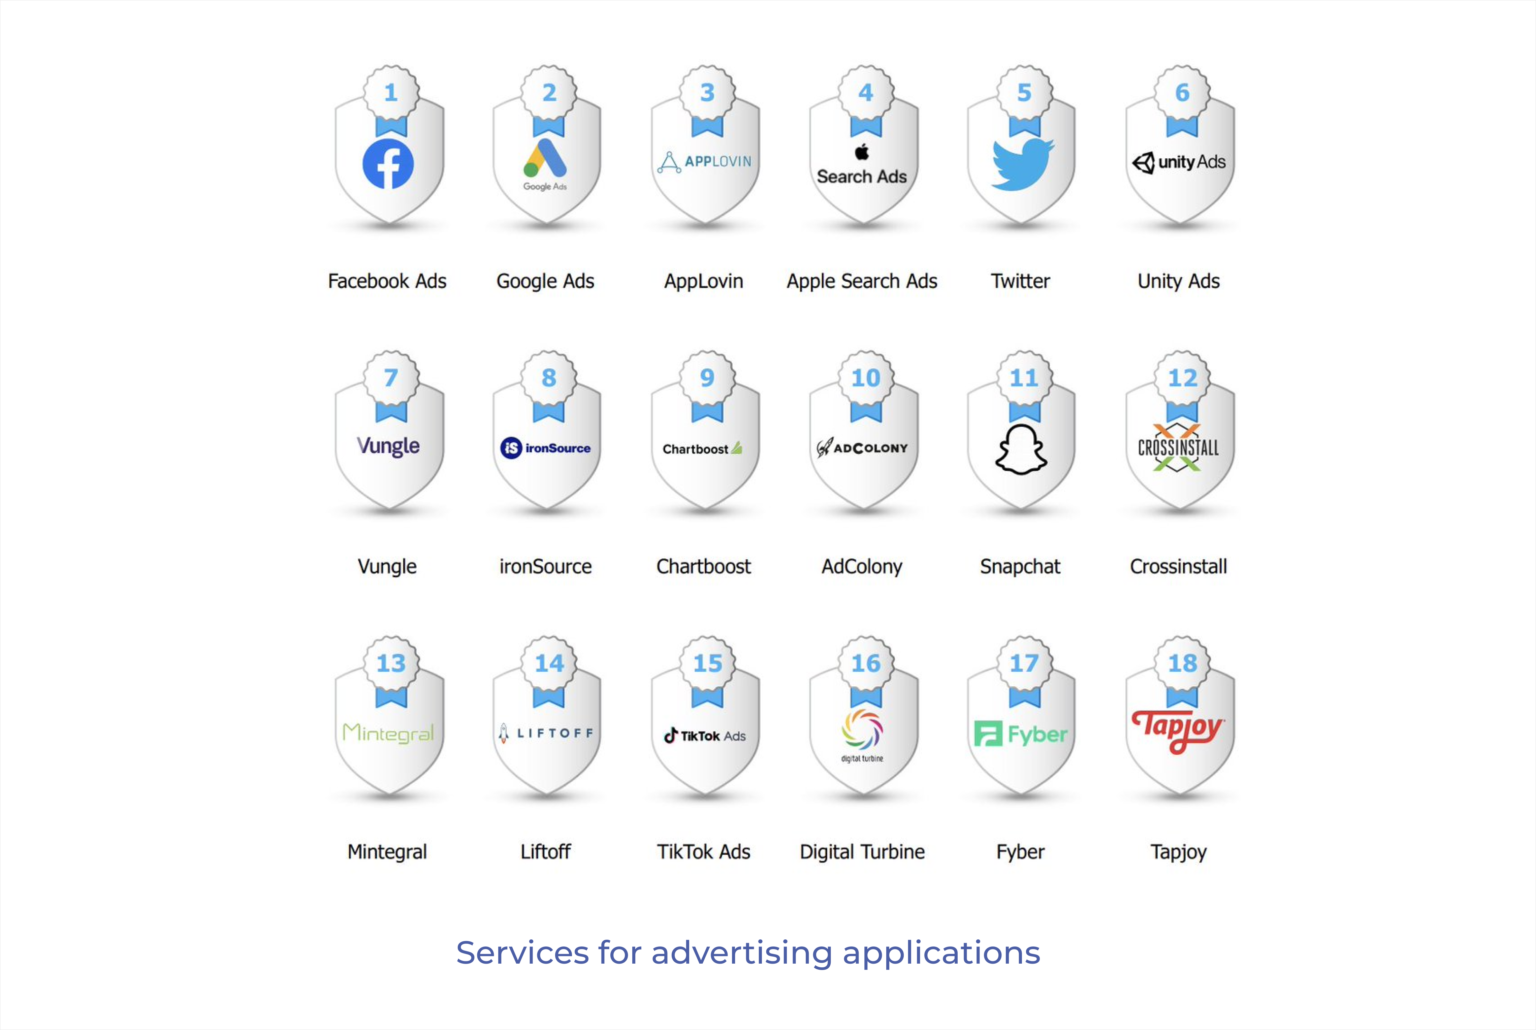 How ASO and advertising help attract users to mobile applications